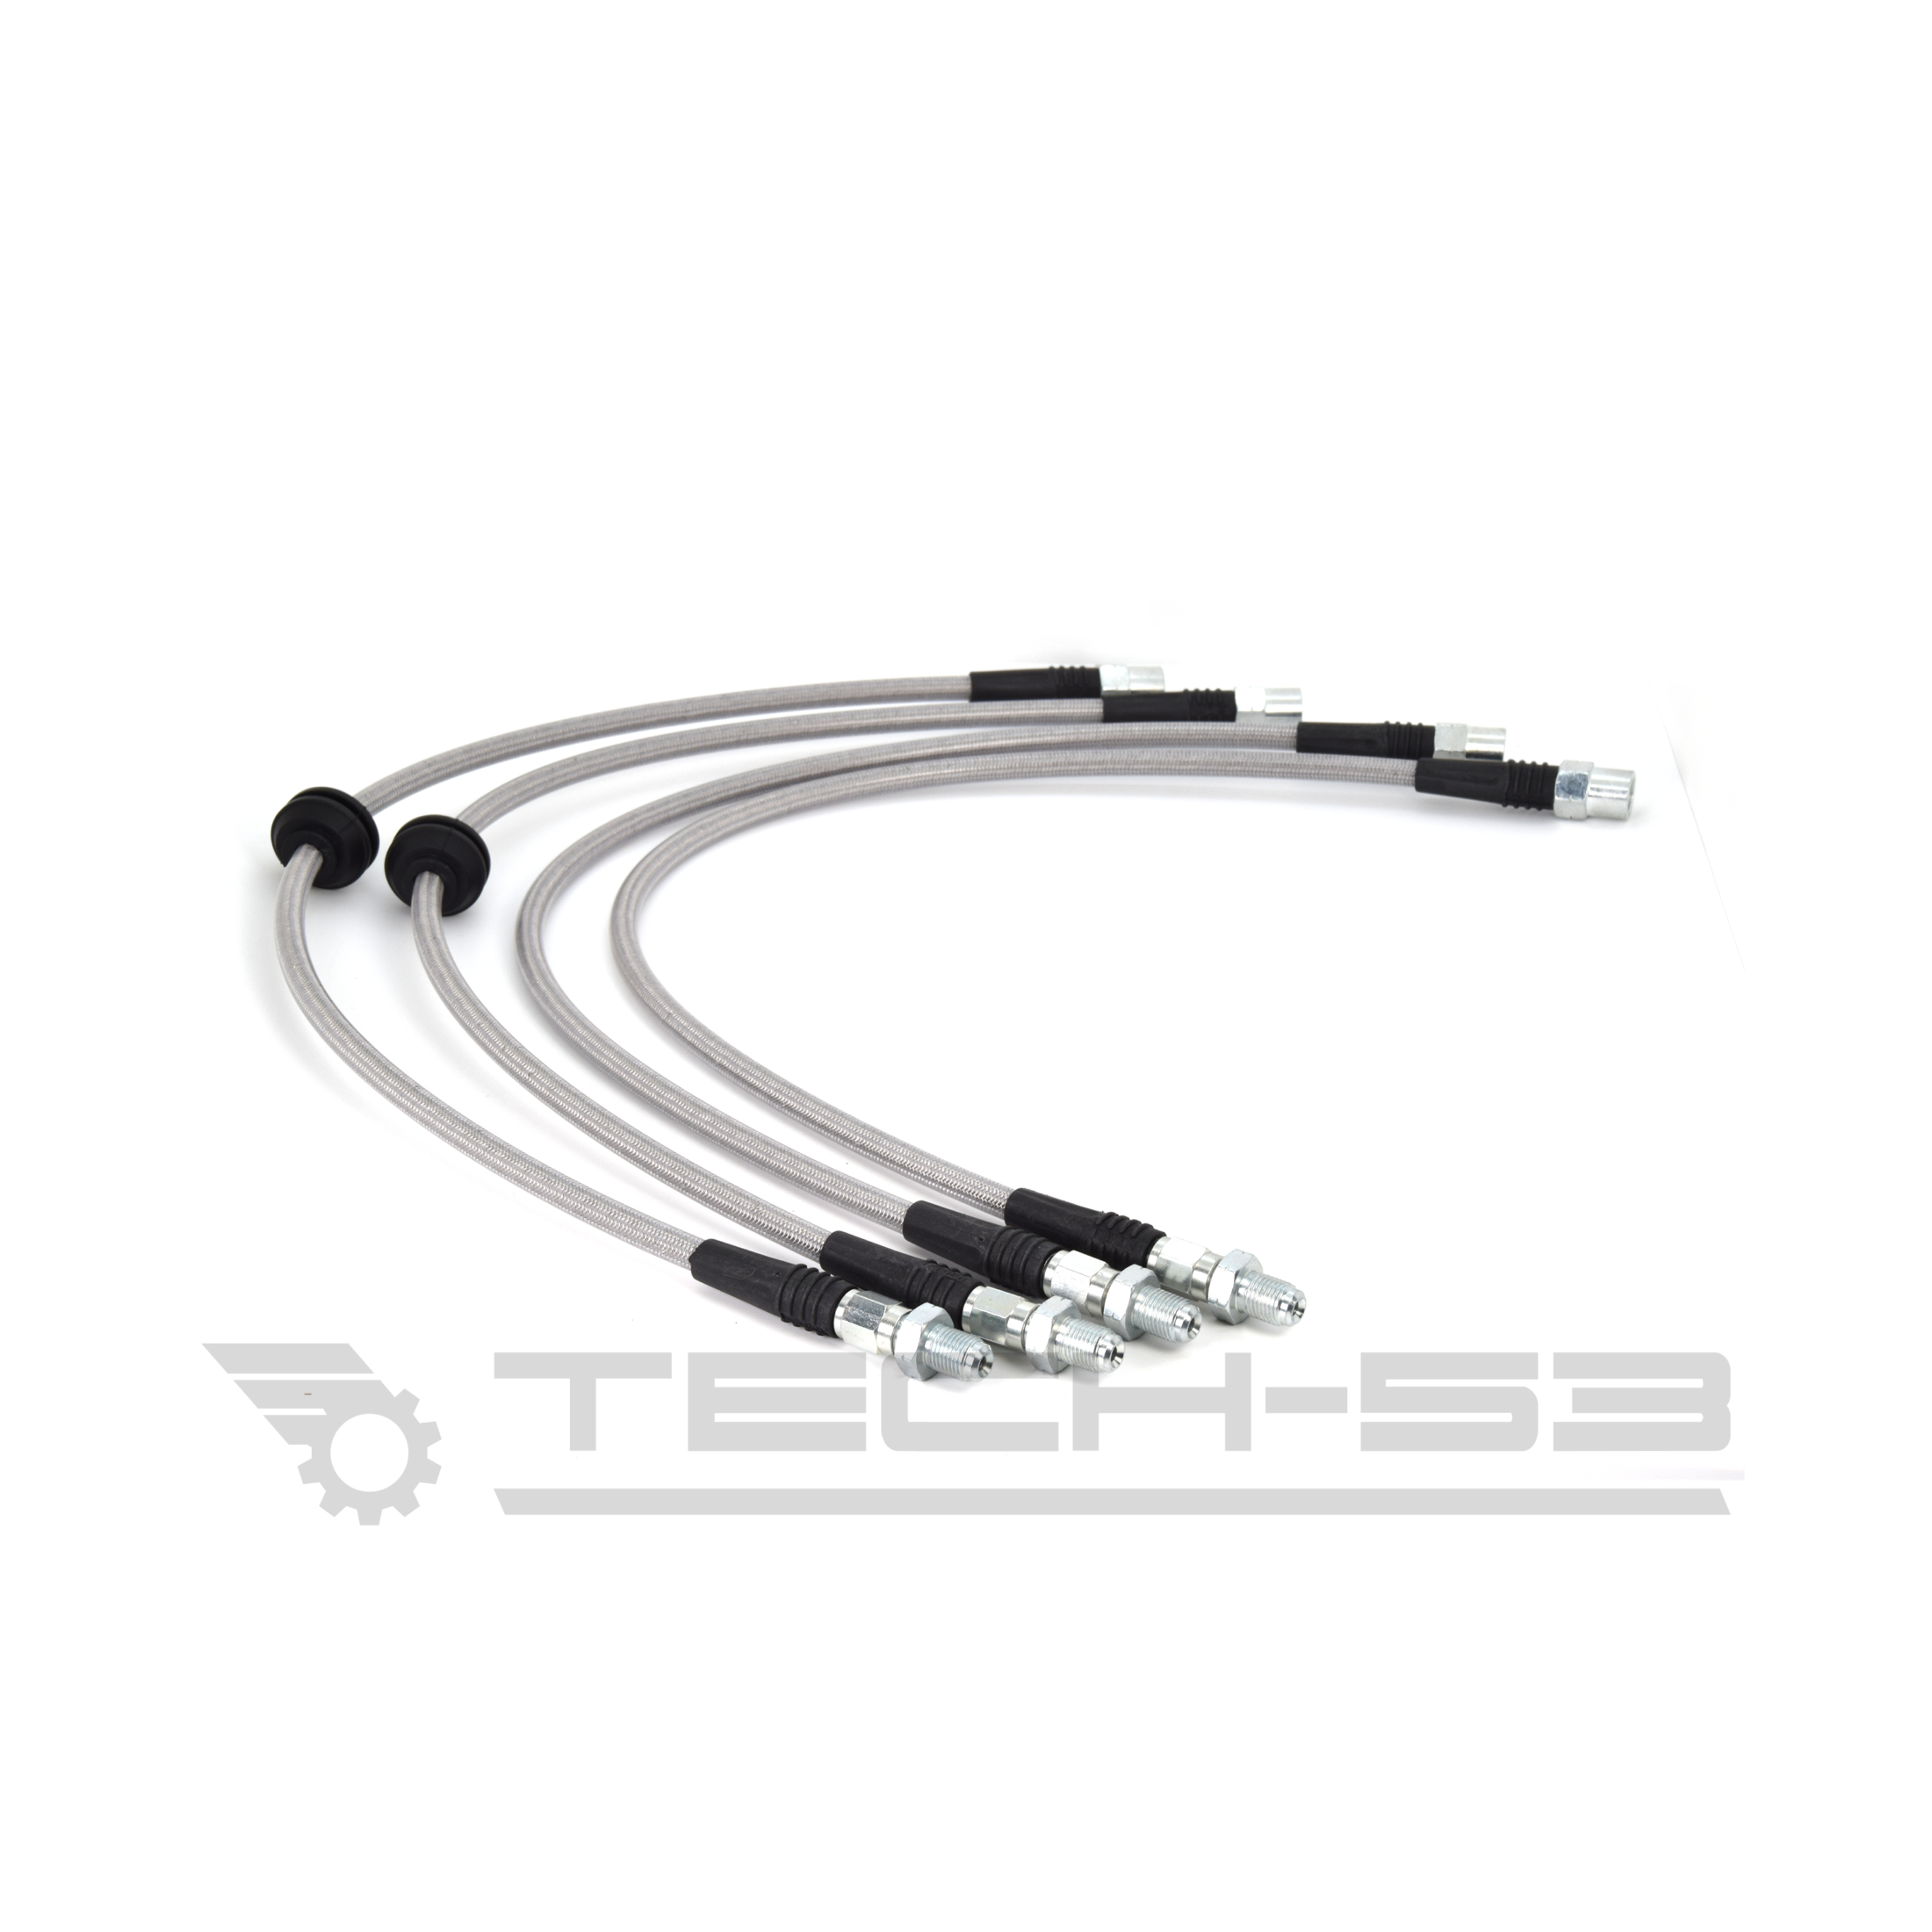 BMW E46 320I 323I 325I 325CI 328I 328CI 330I 330CI FRONT REAR BRAKE LINE UPGRADE STAINLESS STEEL BRAIDED TRACK